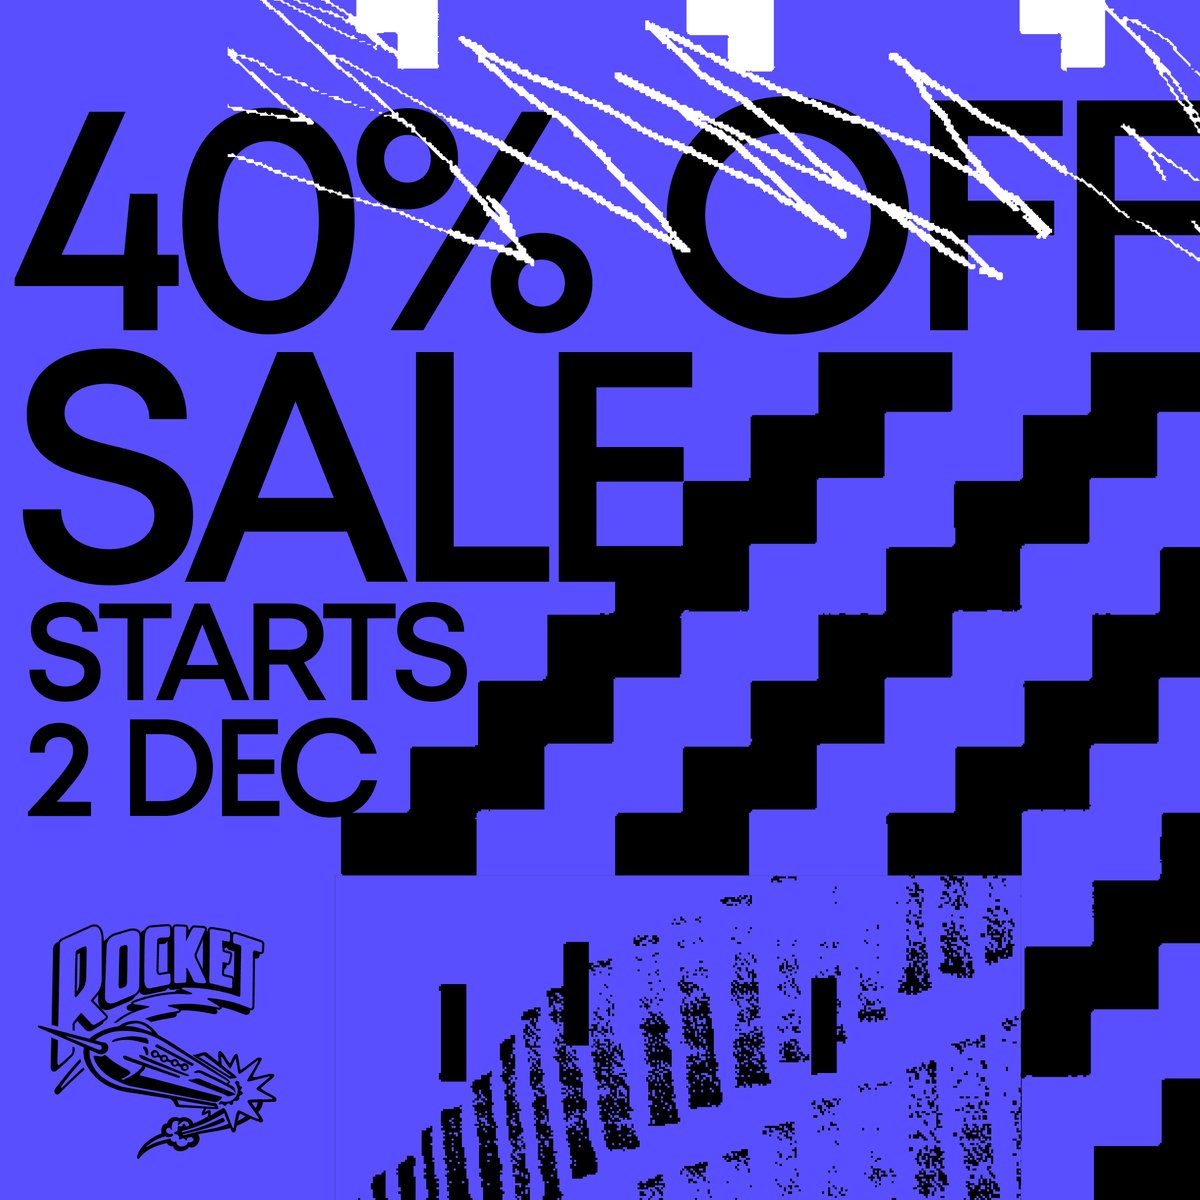 Our seven day 40% OFF SALE starts tomorrow at 8am...use code '2022sale' and pick-up a bargain! rocketrecordings.bandcamp.com/merch